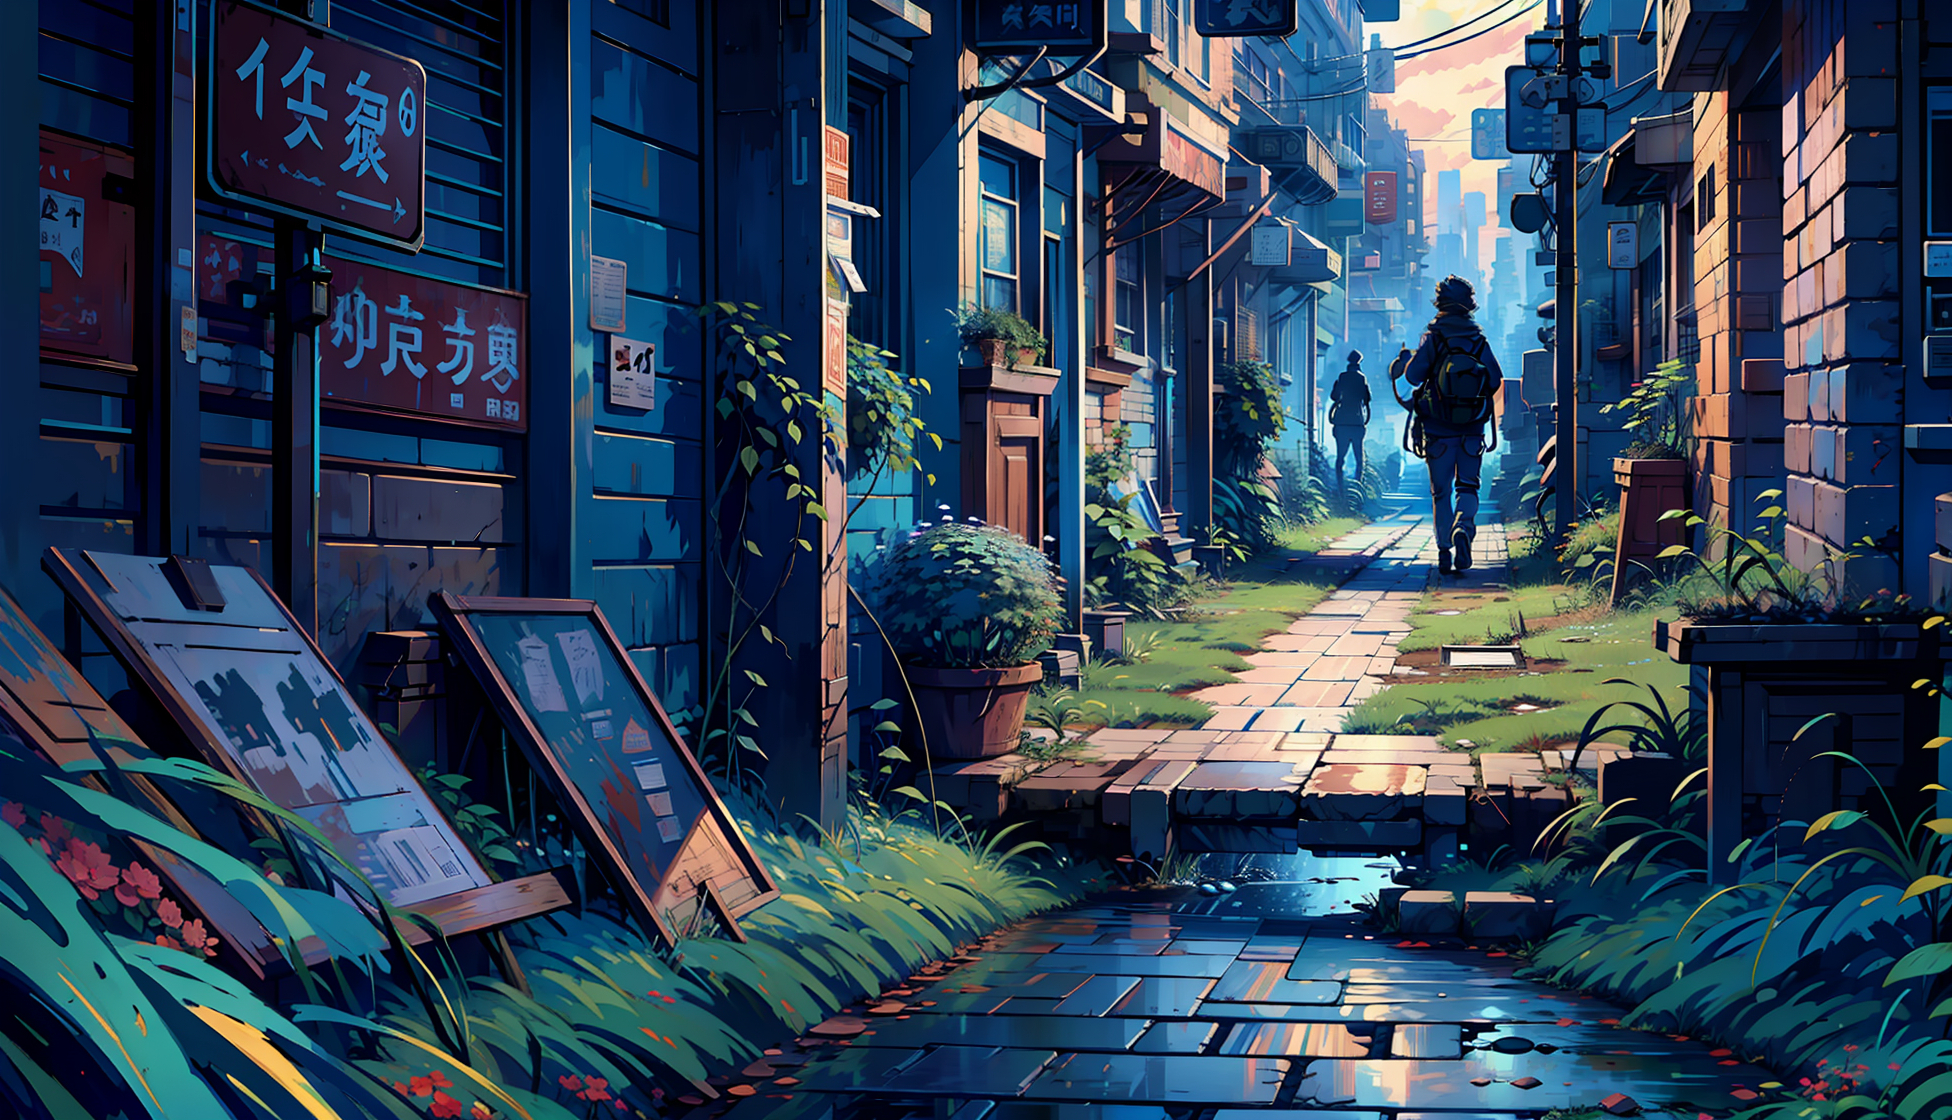 Anime Street City View Anime Scene HD Matte Finish Poster Print Paper Print   Animation  Cartoons posters in India  Buy art film design movie  music nature and educational paintingswallpapers at